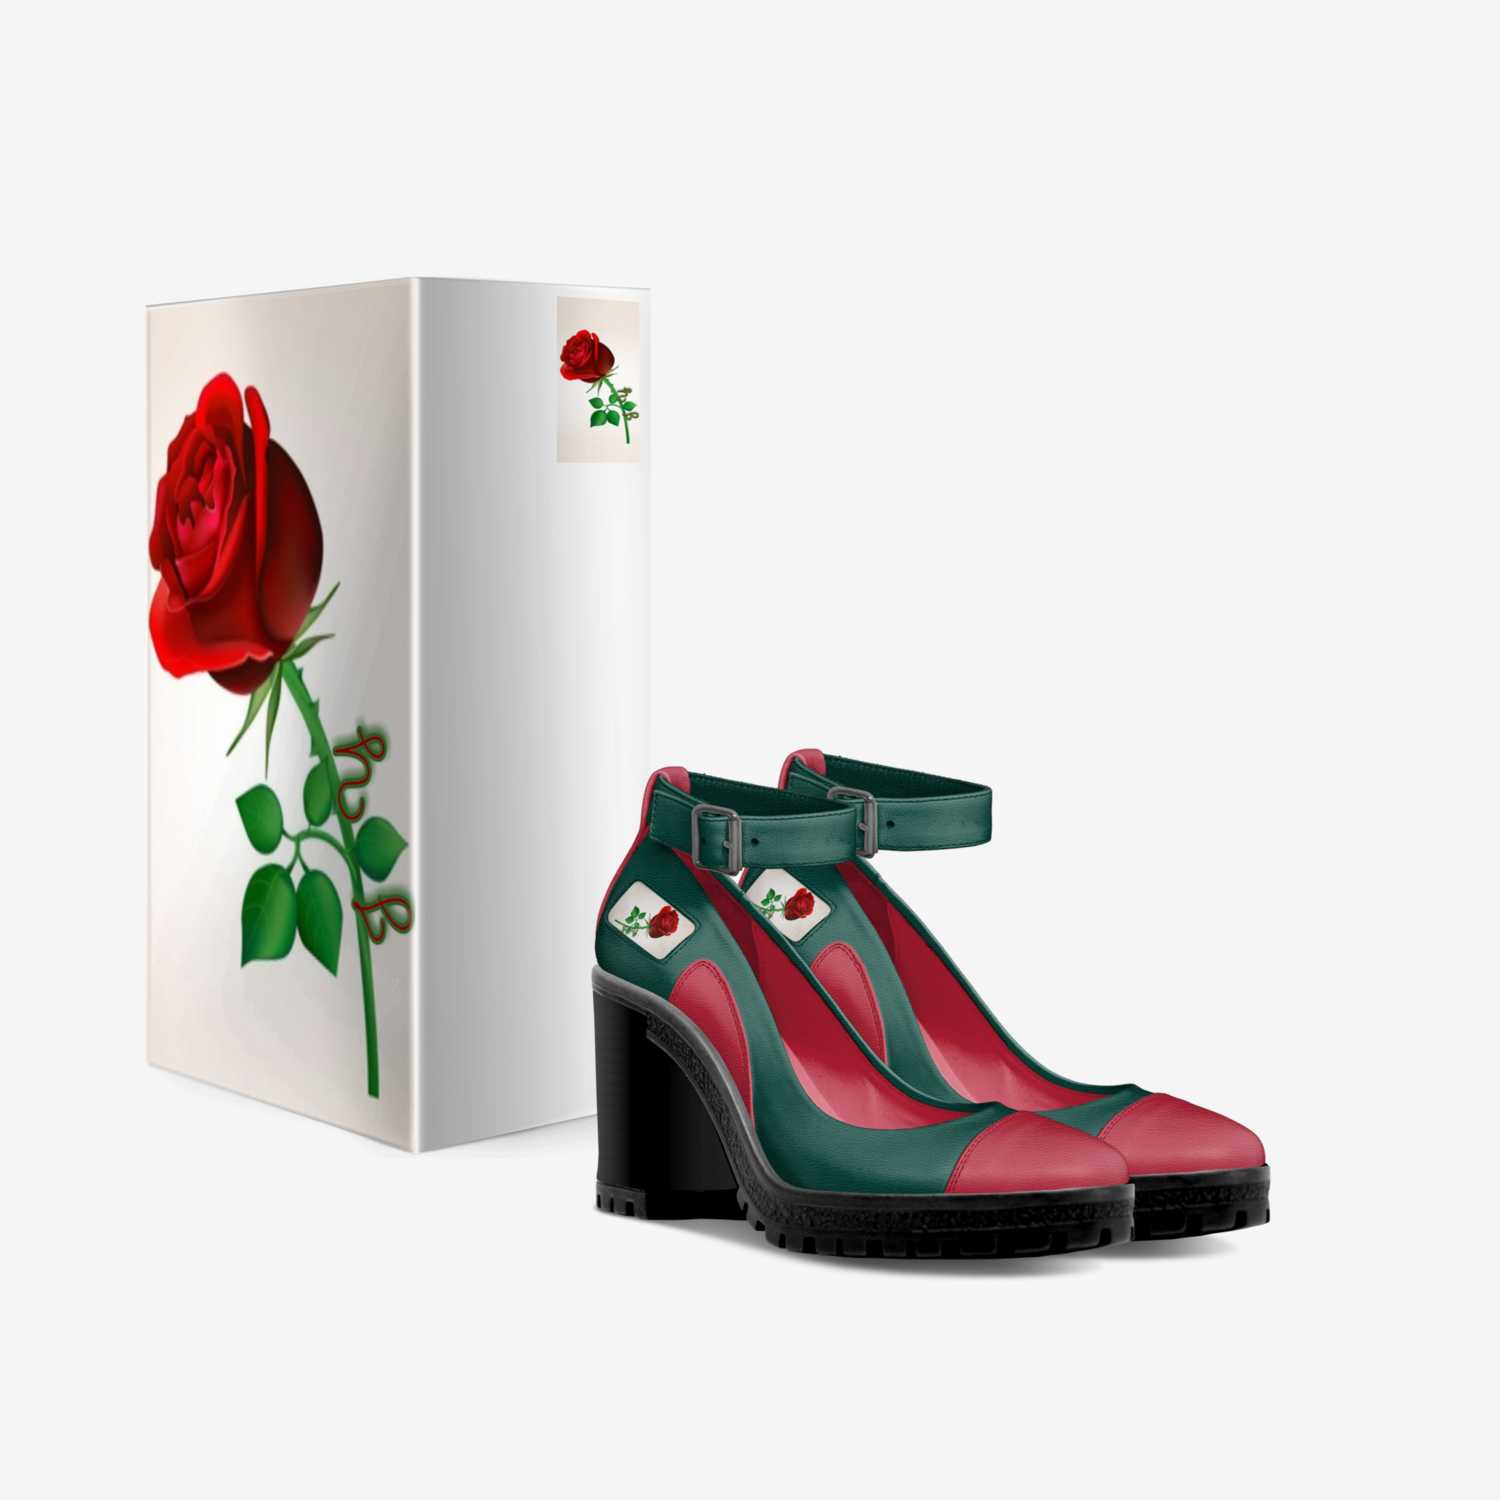 RoseJoy custom made in Italy shoes by Work Grind Hustle Apperal | Box view